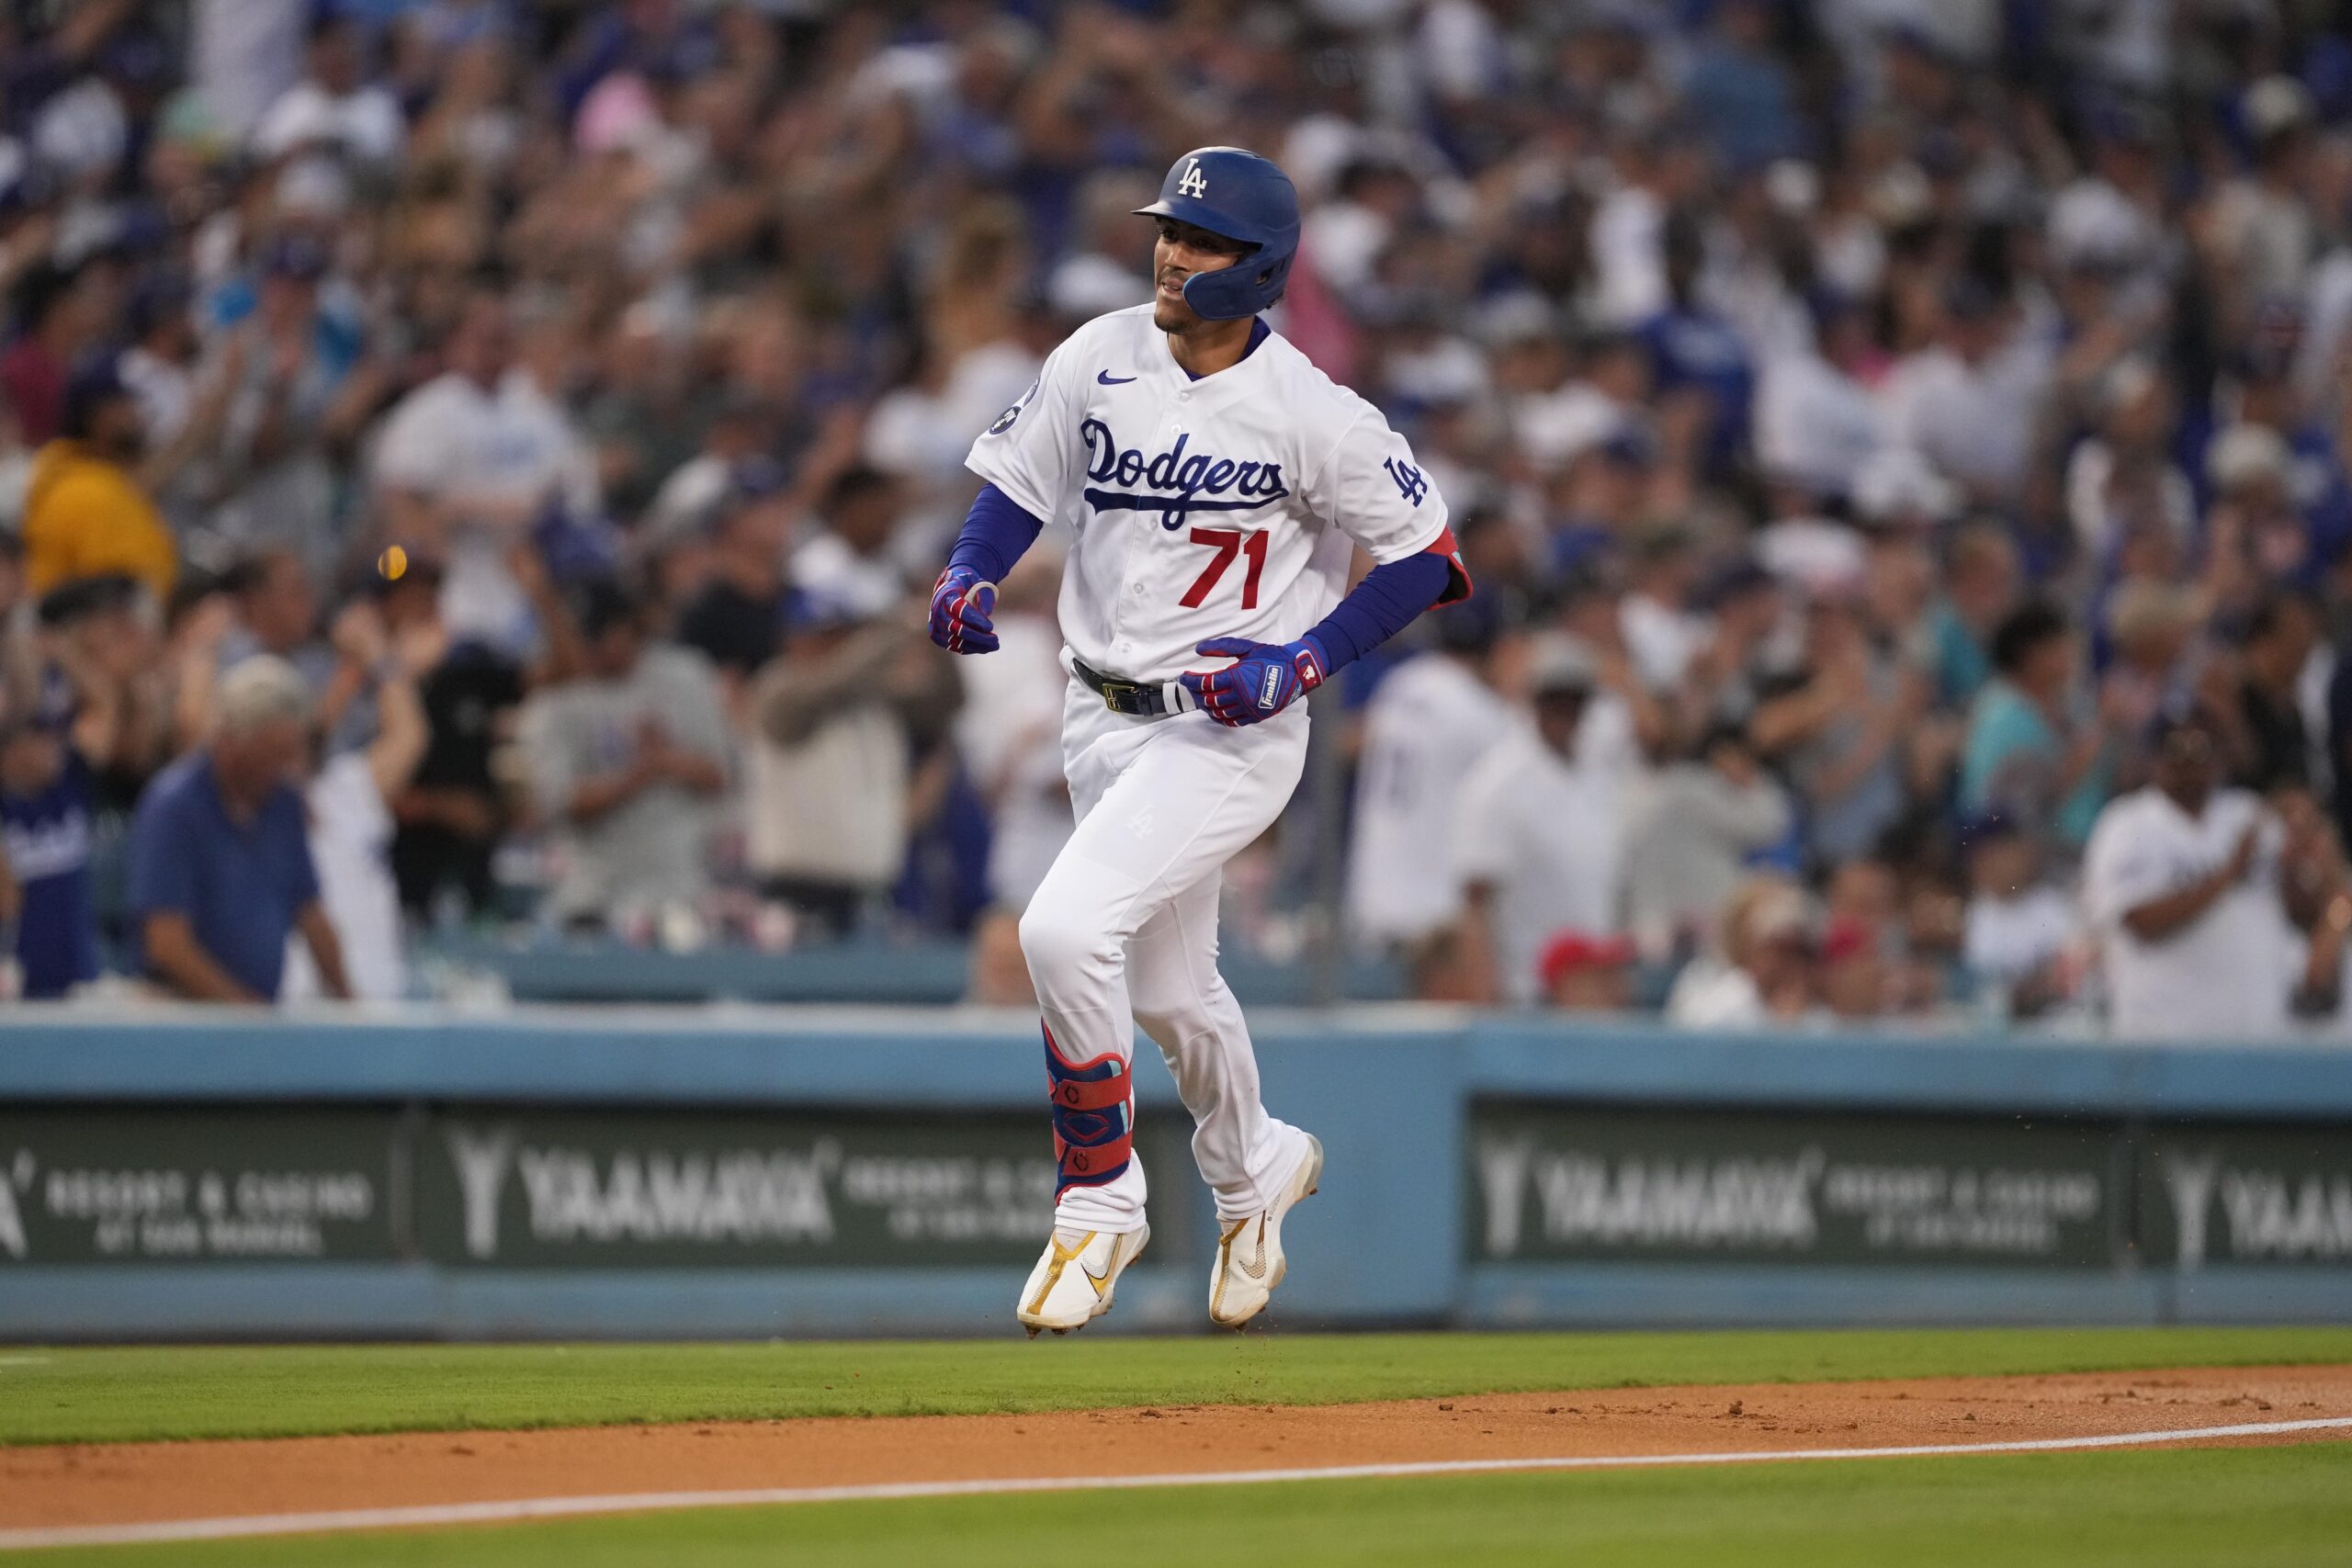 Dodgers News: Miguel Vargas Passes on Opportunity to Play for Cuba in WBC